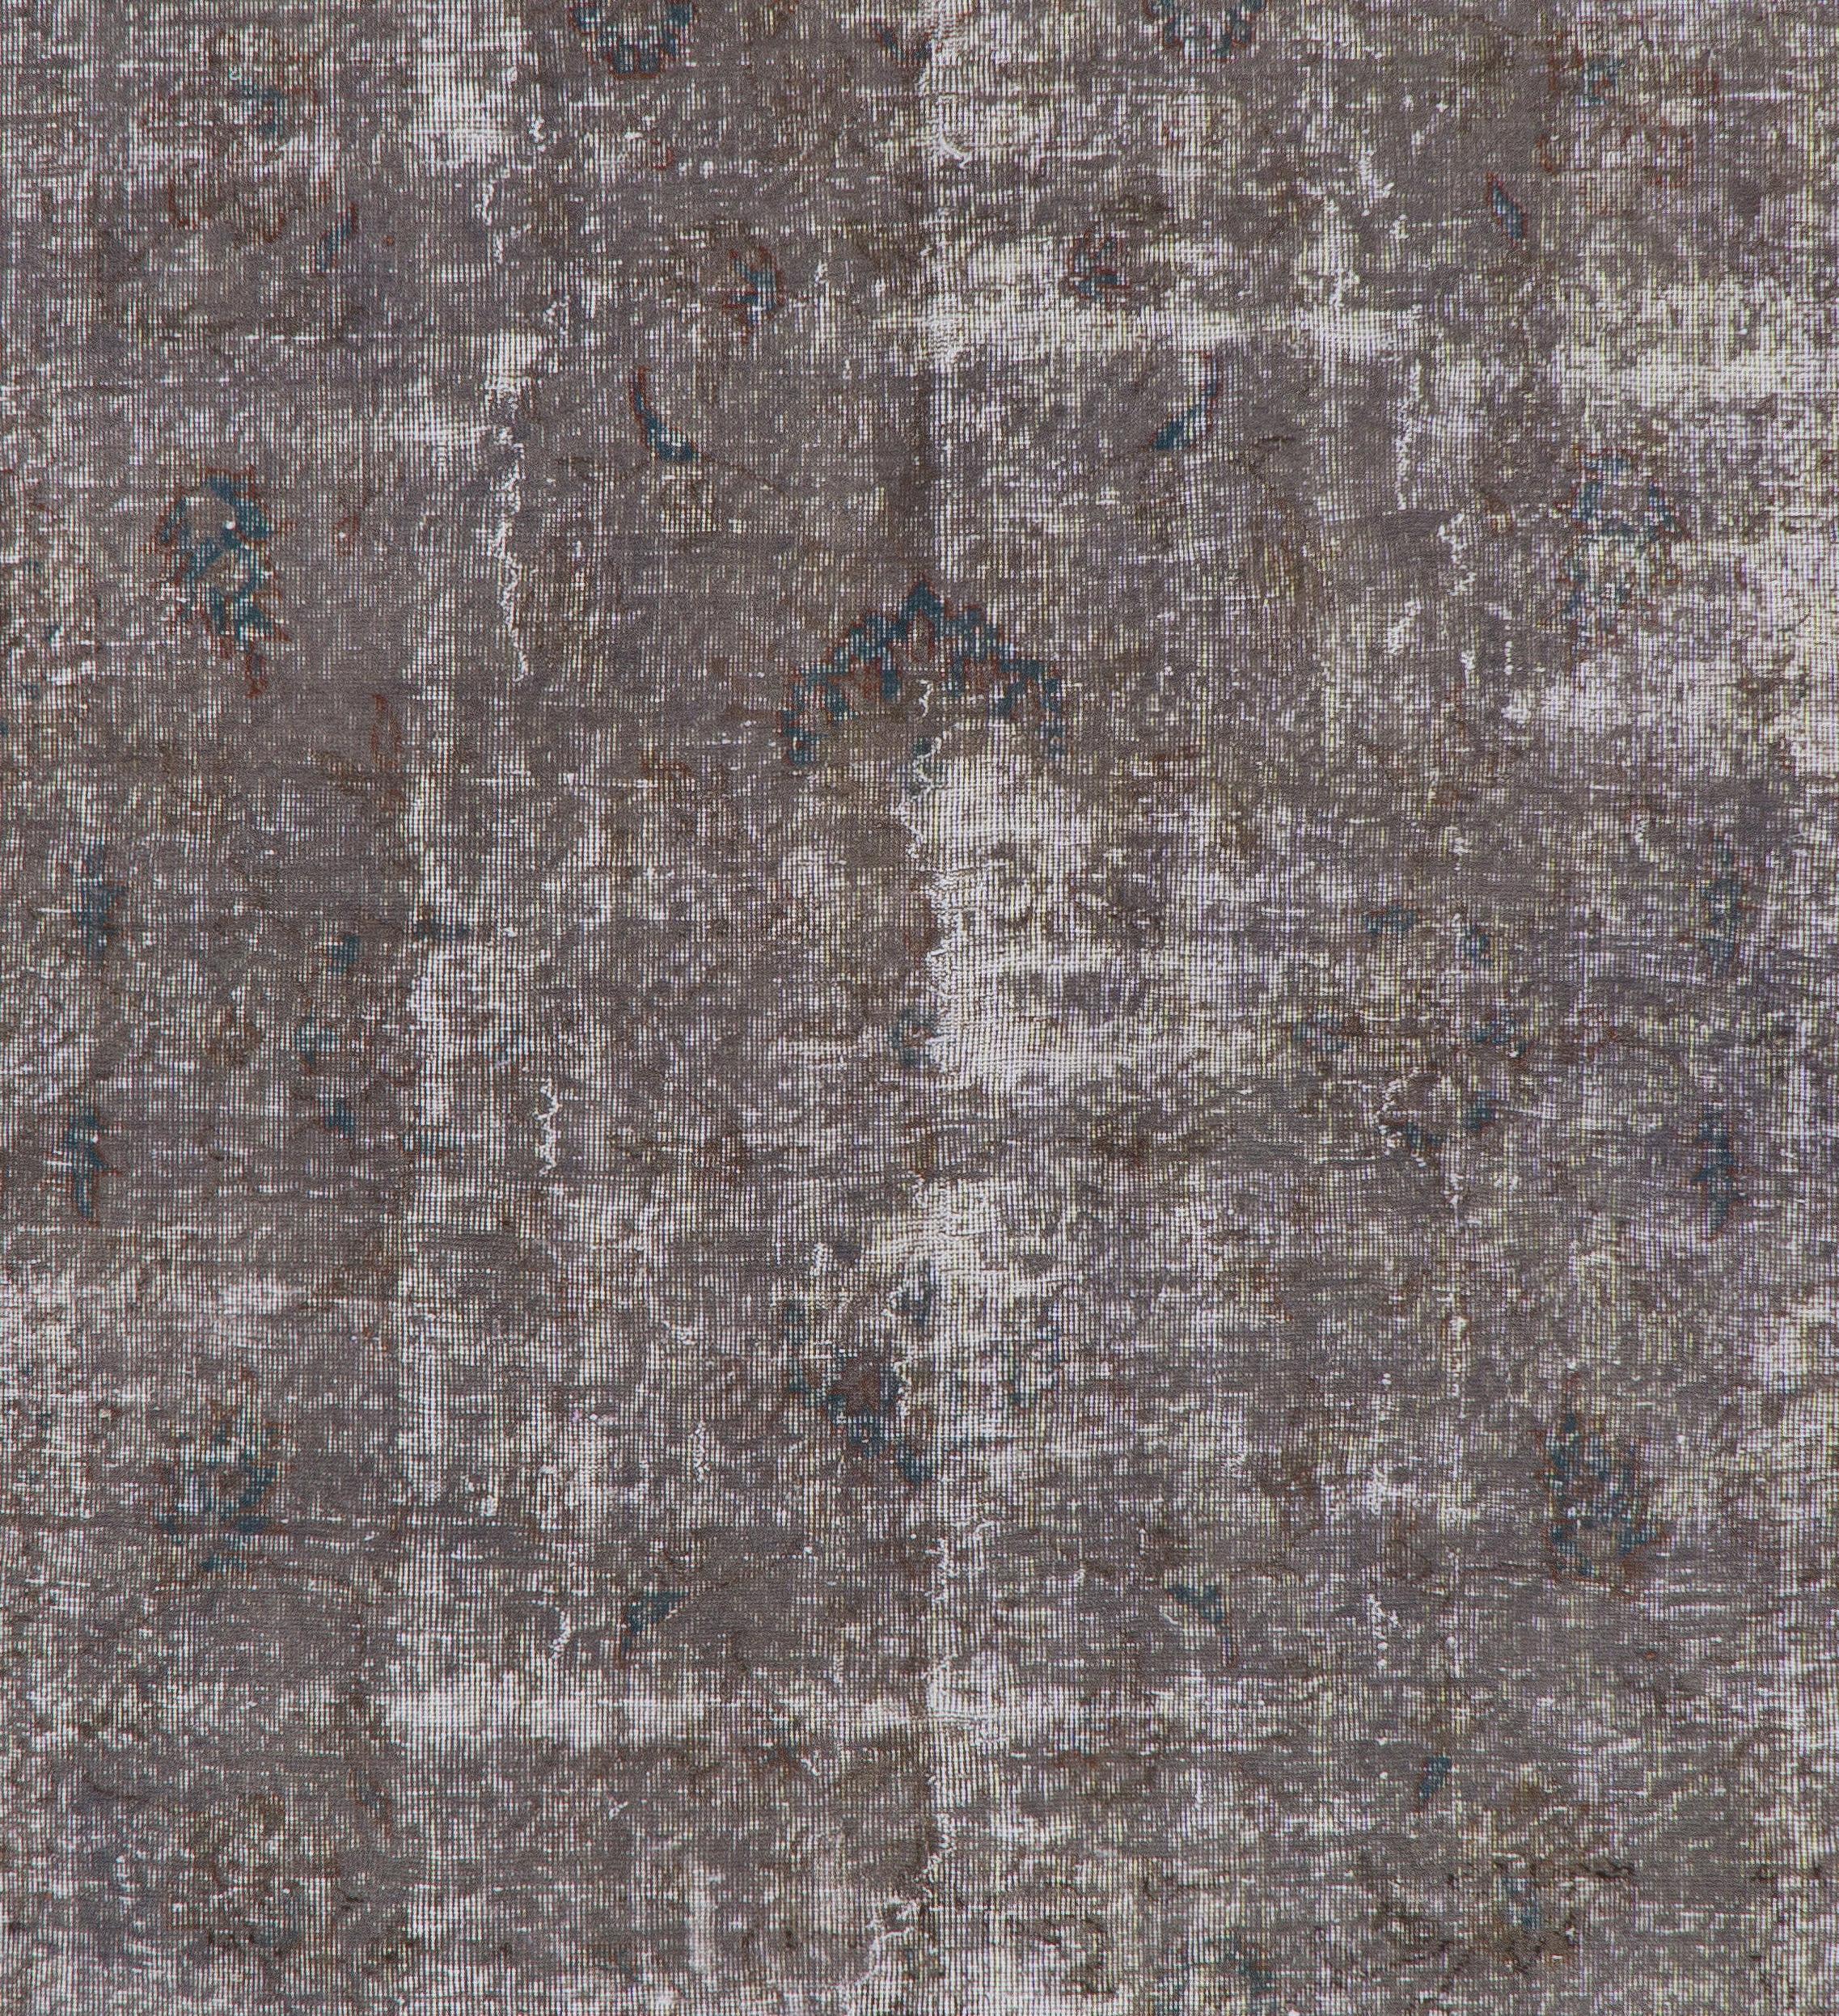 20th Century 6.4x10 Ft Distressed 1950s Turkish Wool Area Rug. Handmade Taupe Grey Carpet For Sale